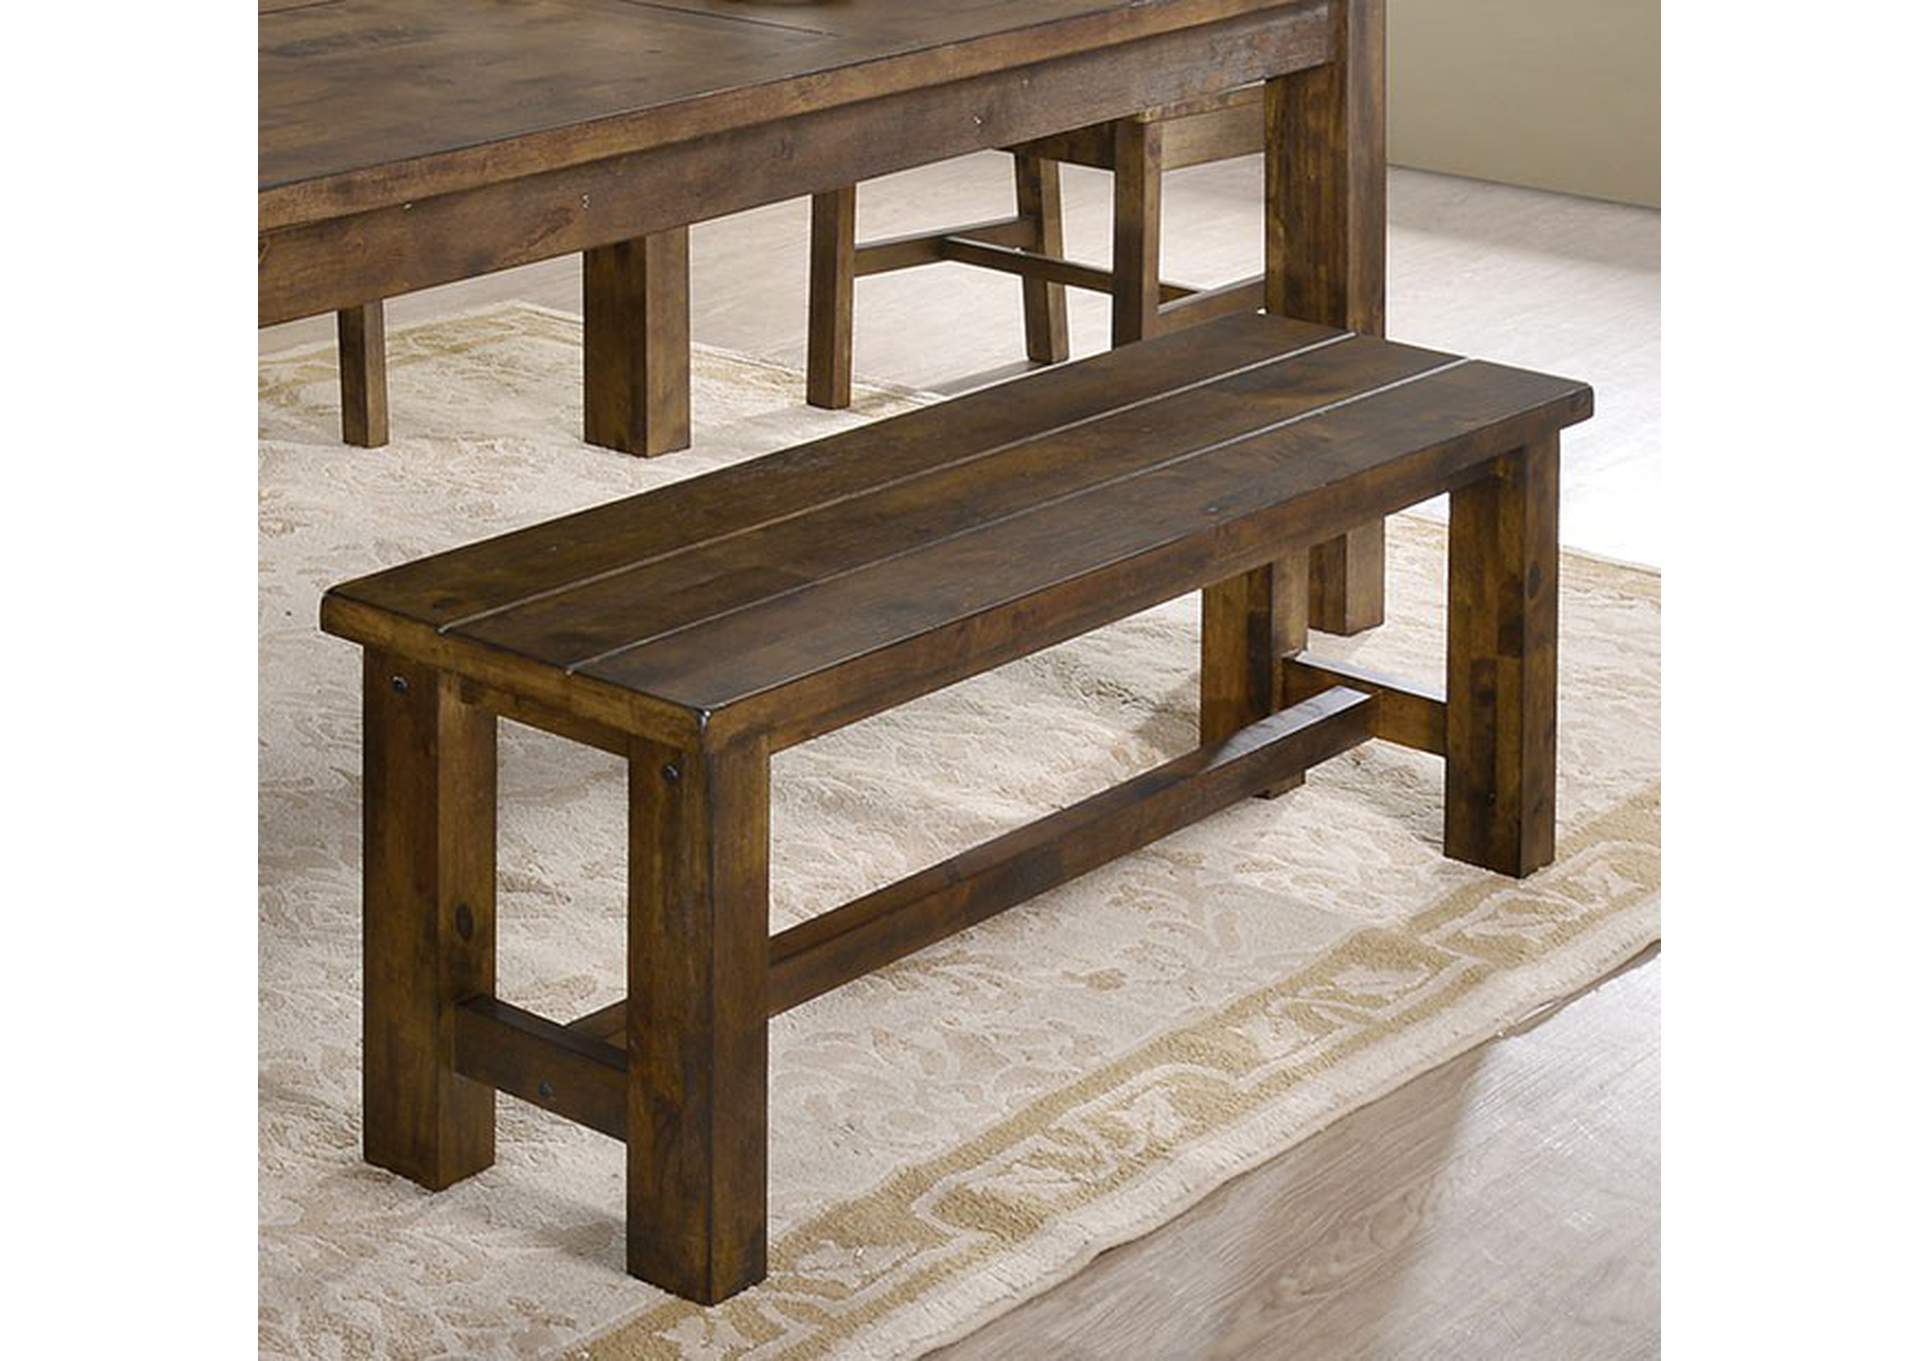 Kristen Dining Table,Furniture of America